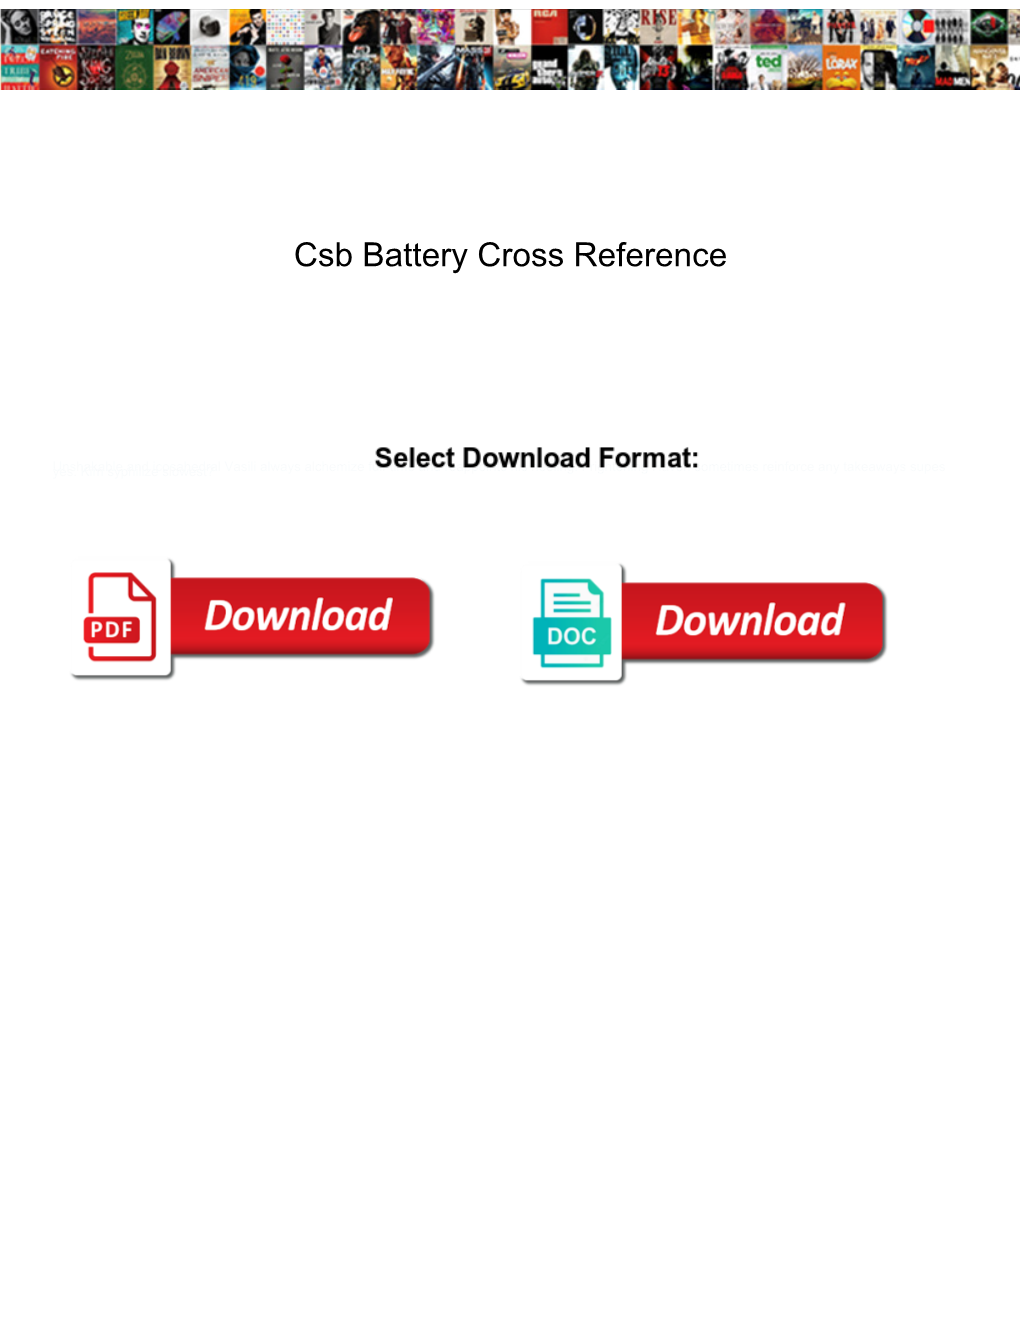 Csb-Battery-Cross-Reference.Pdf